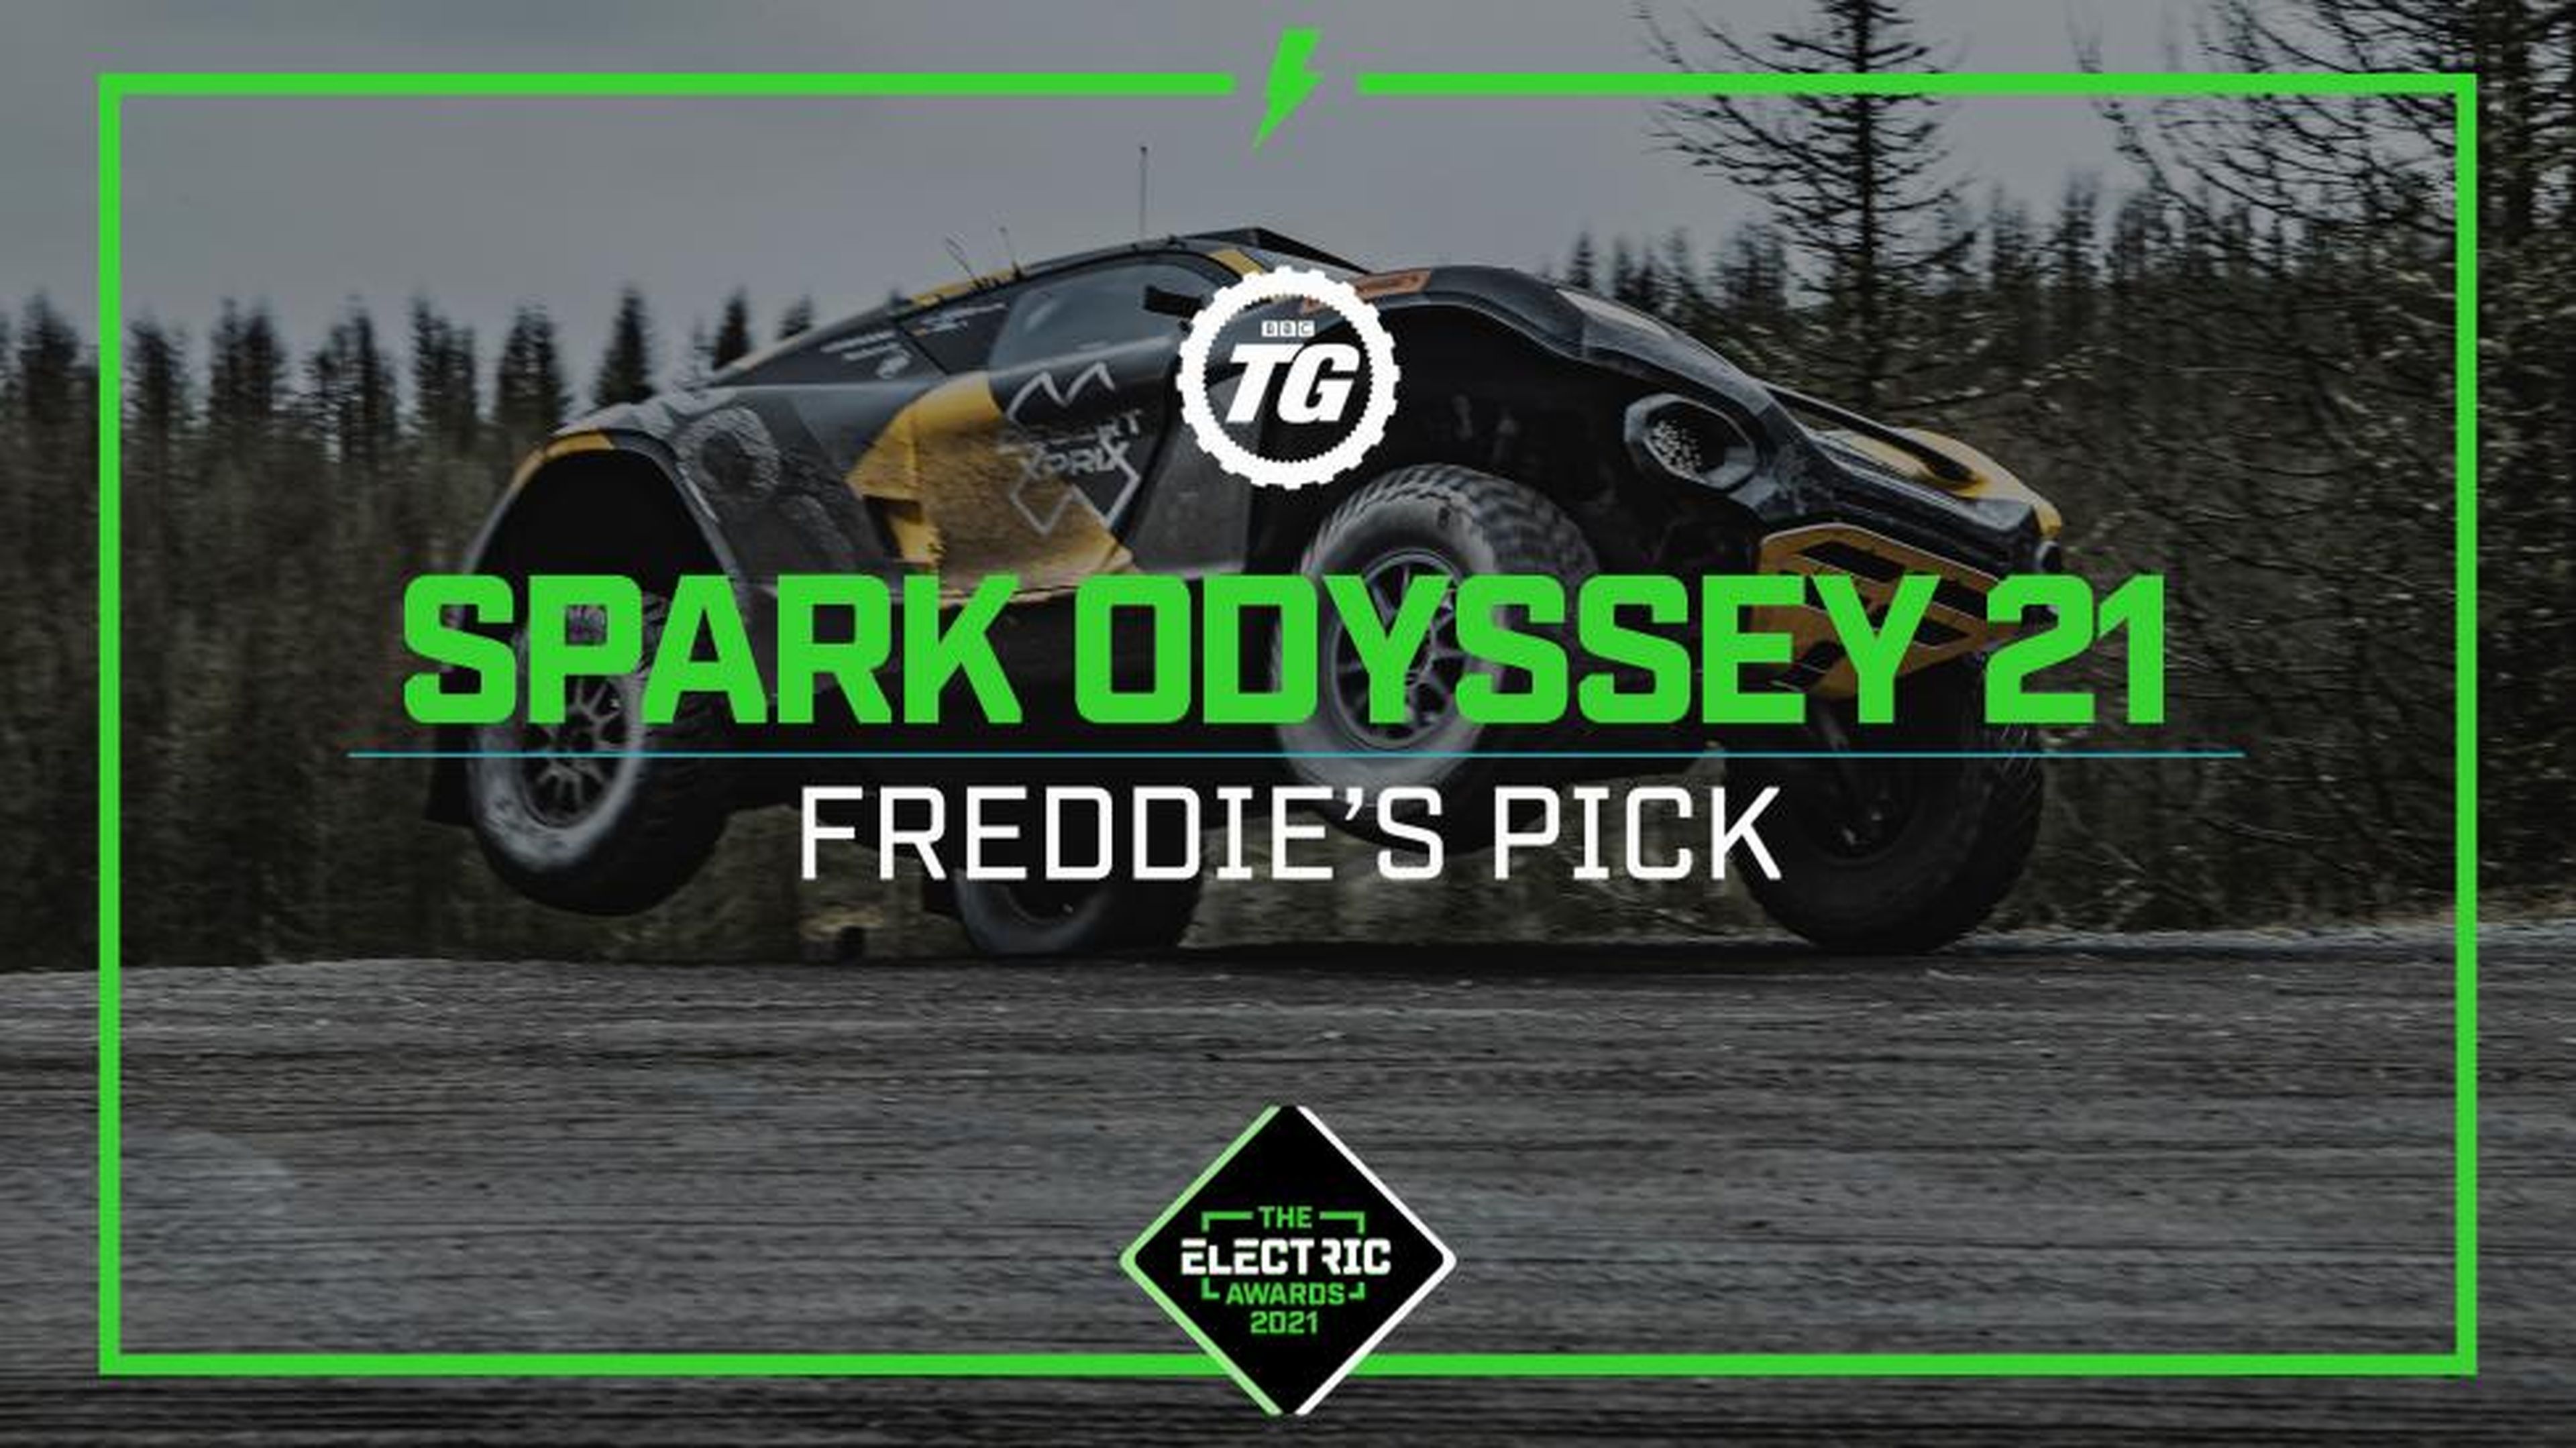 Top Gear Electric Awards: Spark Odissey